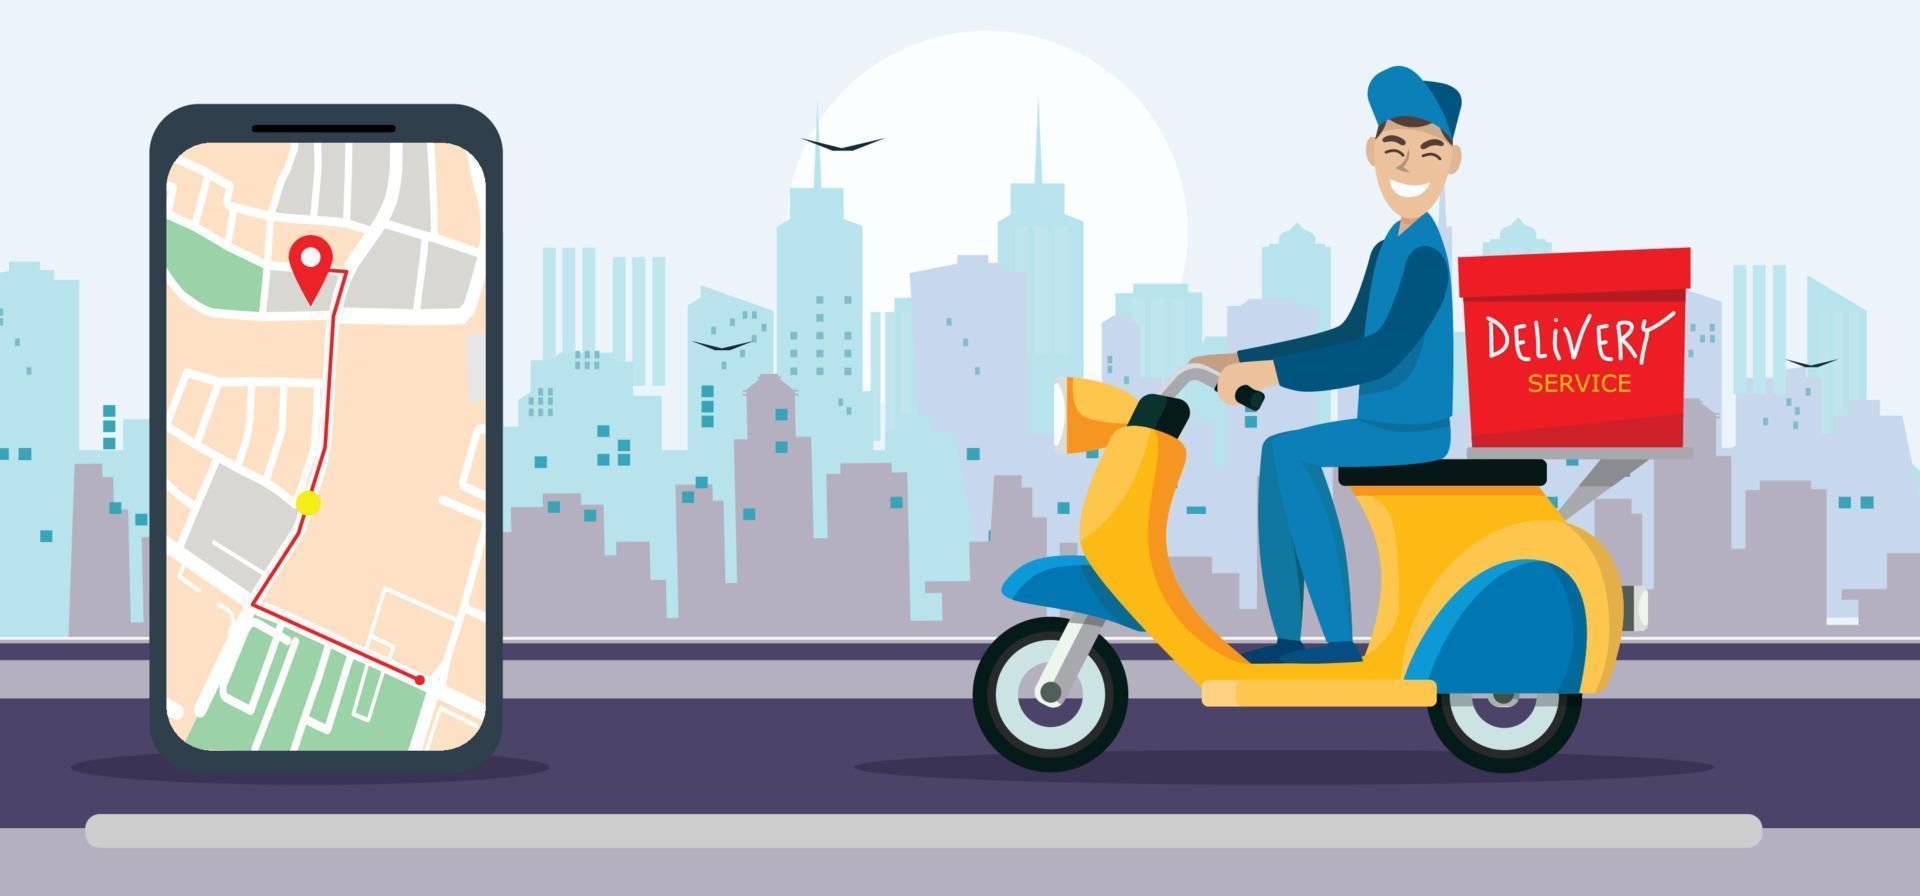 Delivery man riding a red scooter illustration,Delivery service app on mobile phone. Delivery Motorbike  and mobile phone with map on city background. Flat style vector illustration.